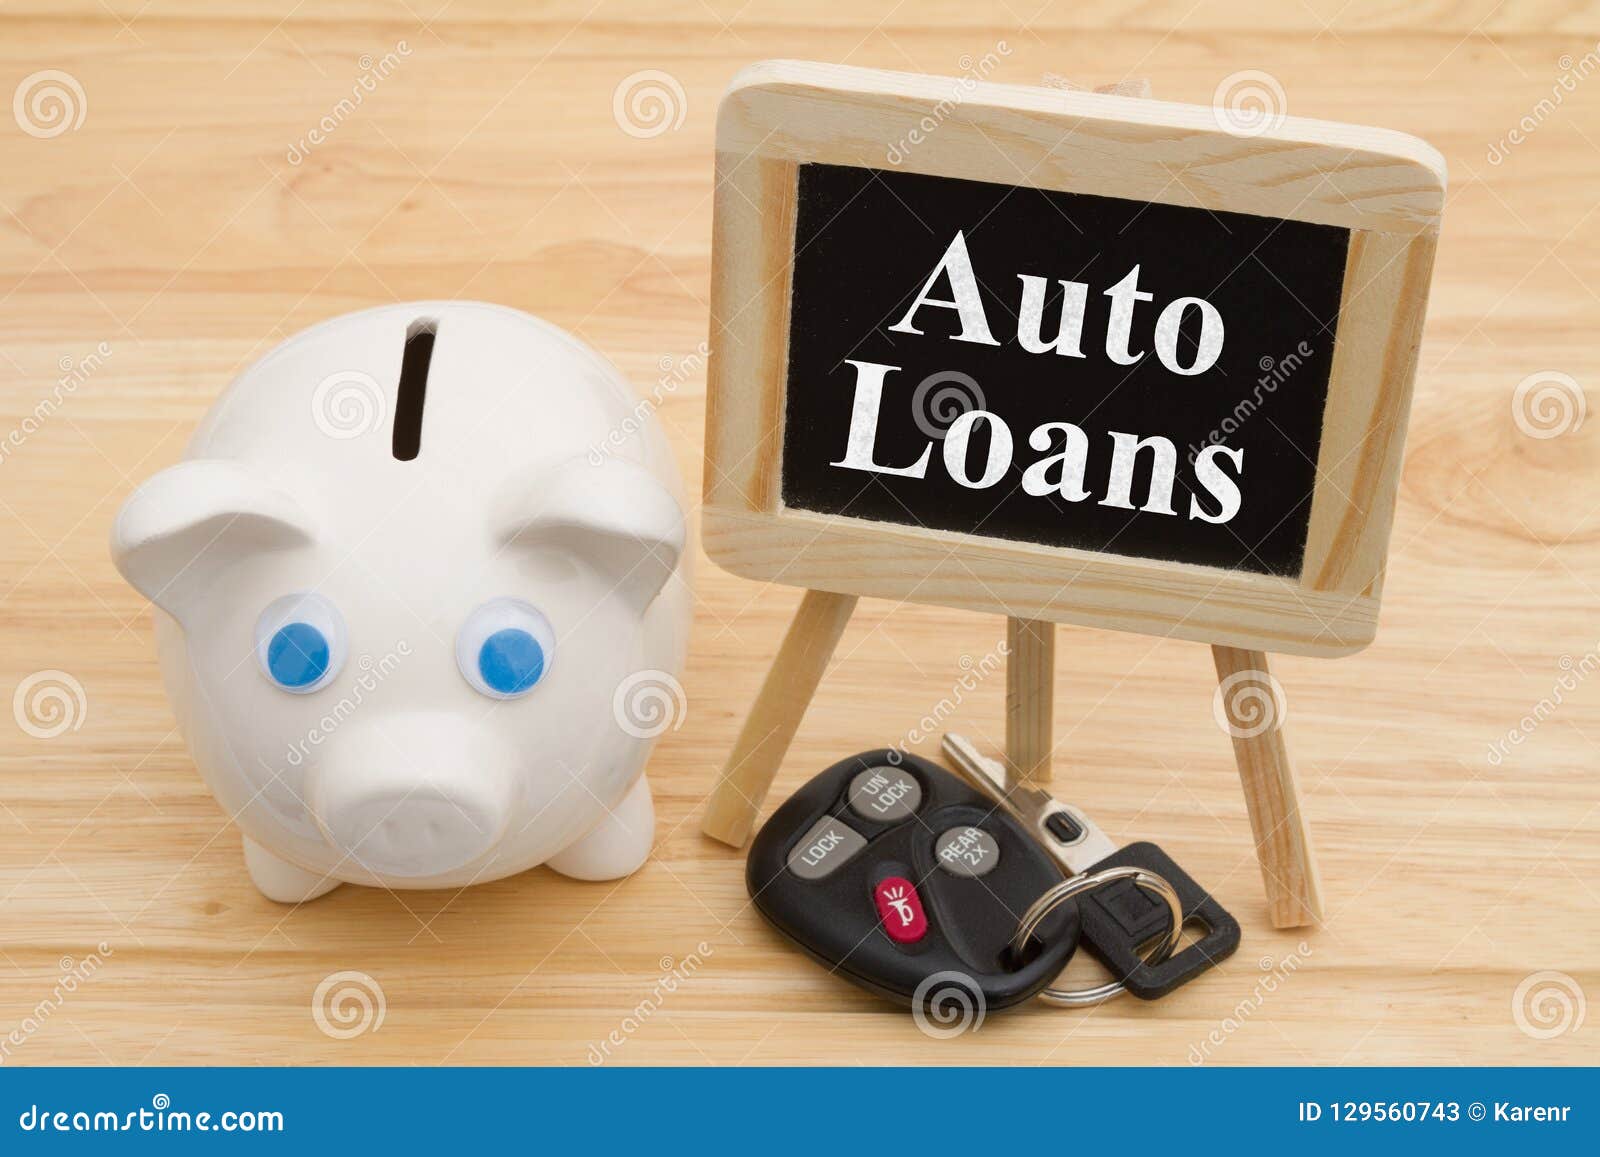 learning about car loans with car keys